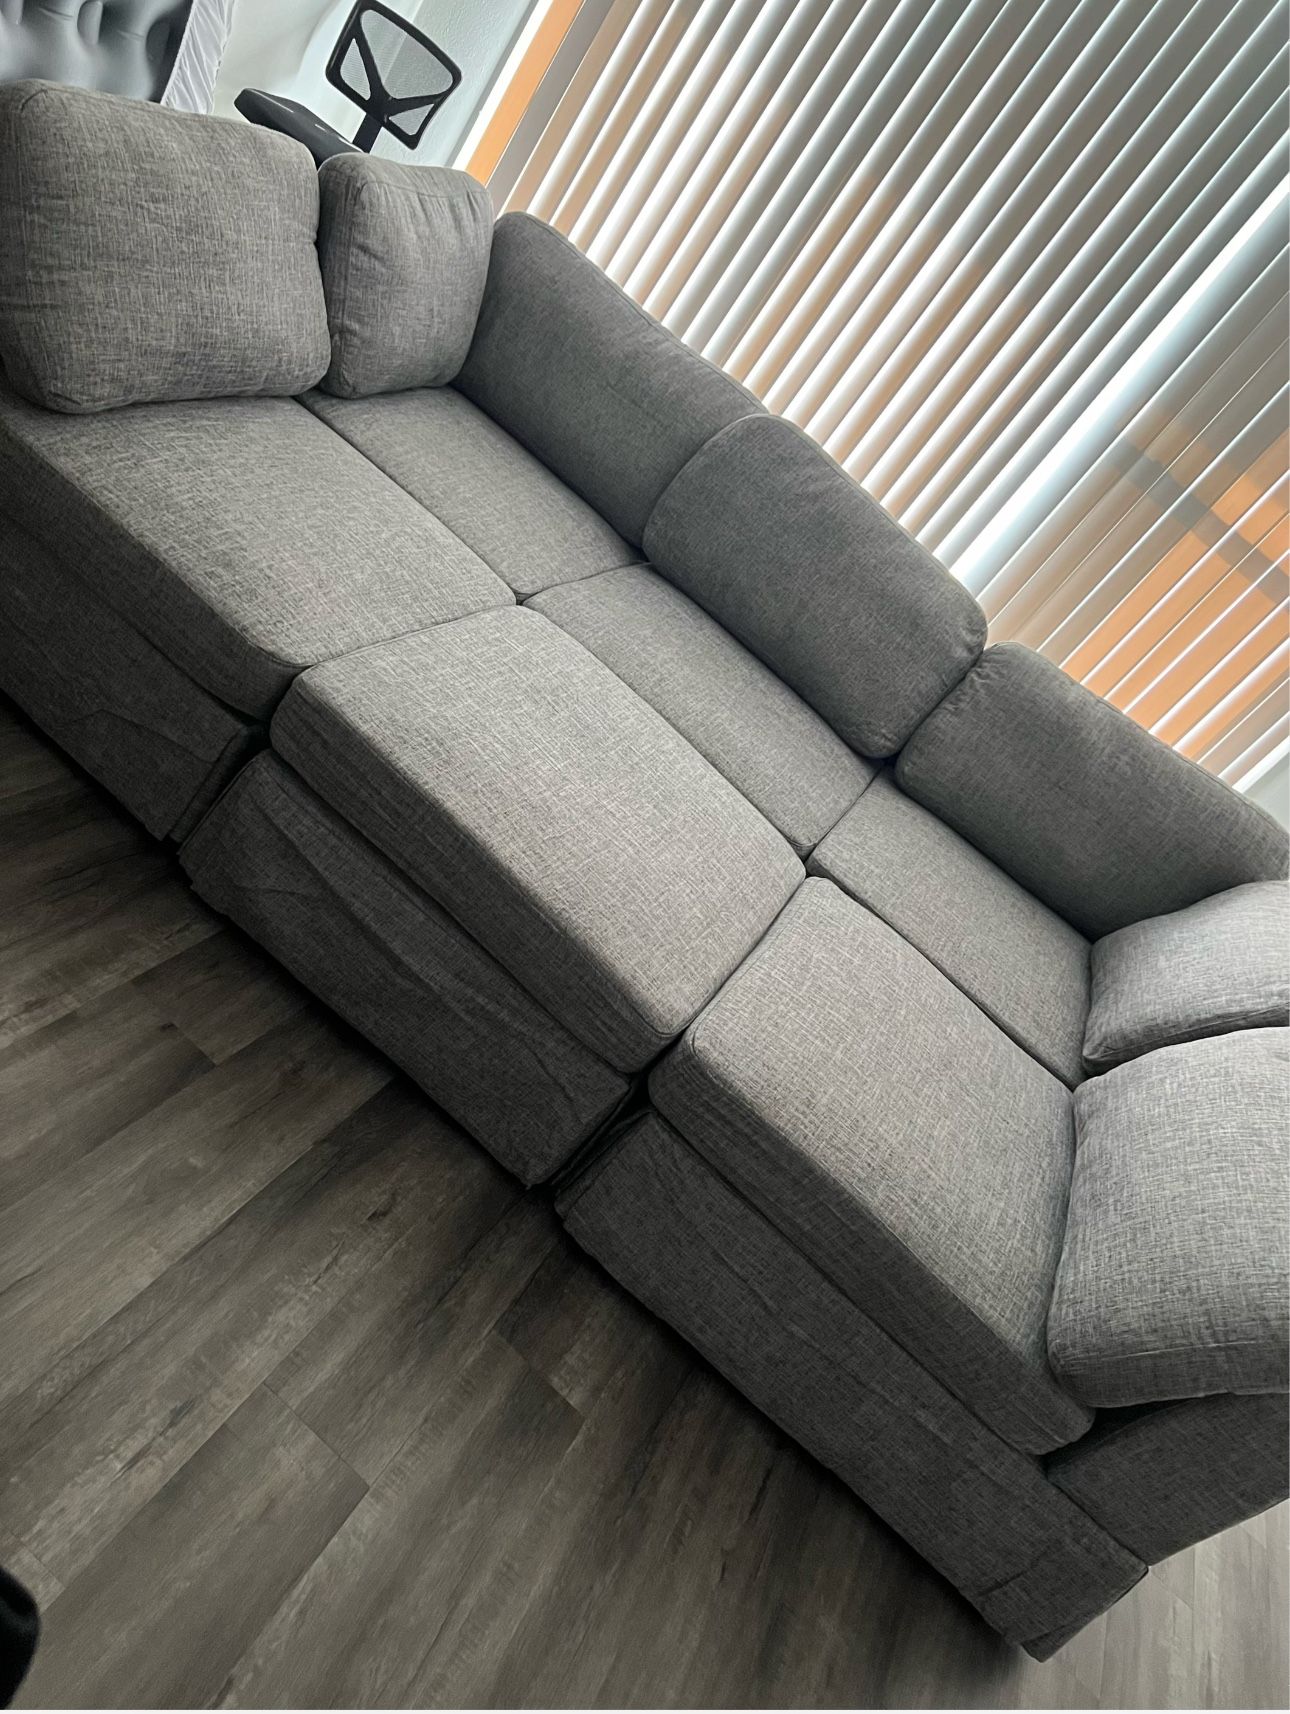 6 Piece Upholstered Sectional Couch